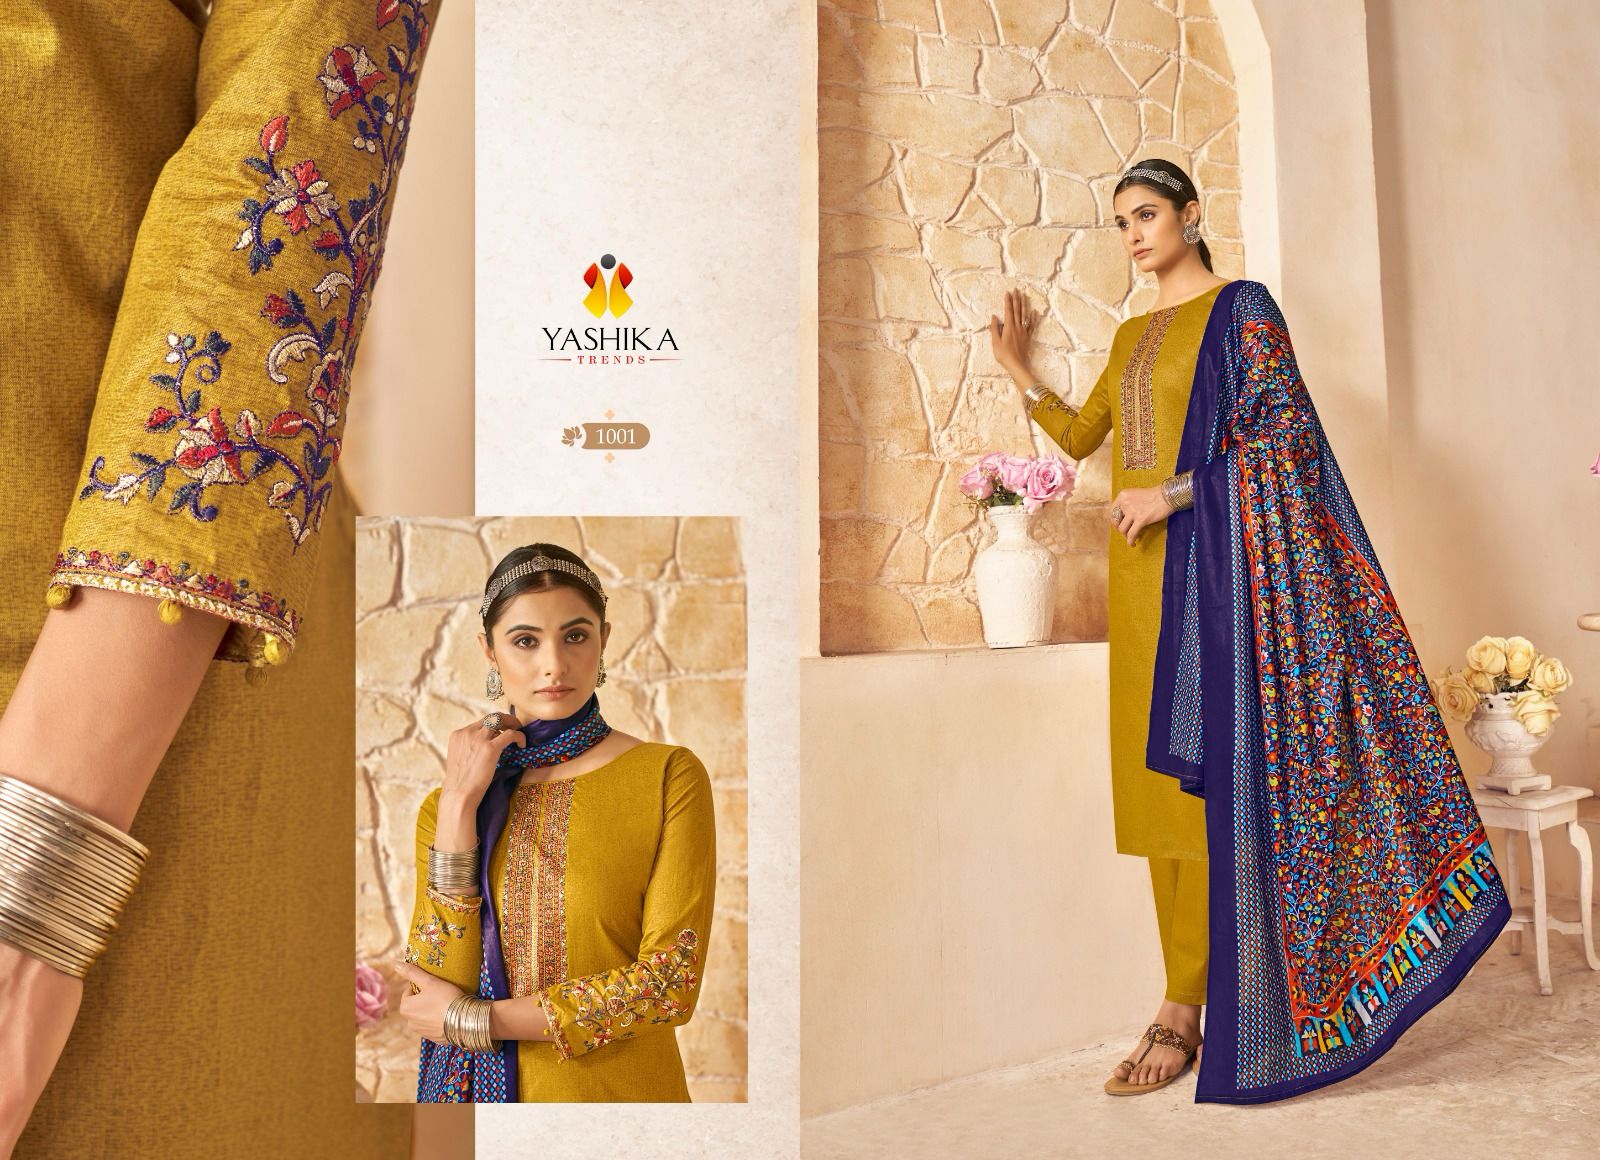 Seher Yashika Trends Cotton Plazzo Style Suits